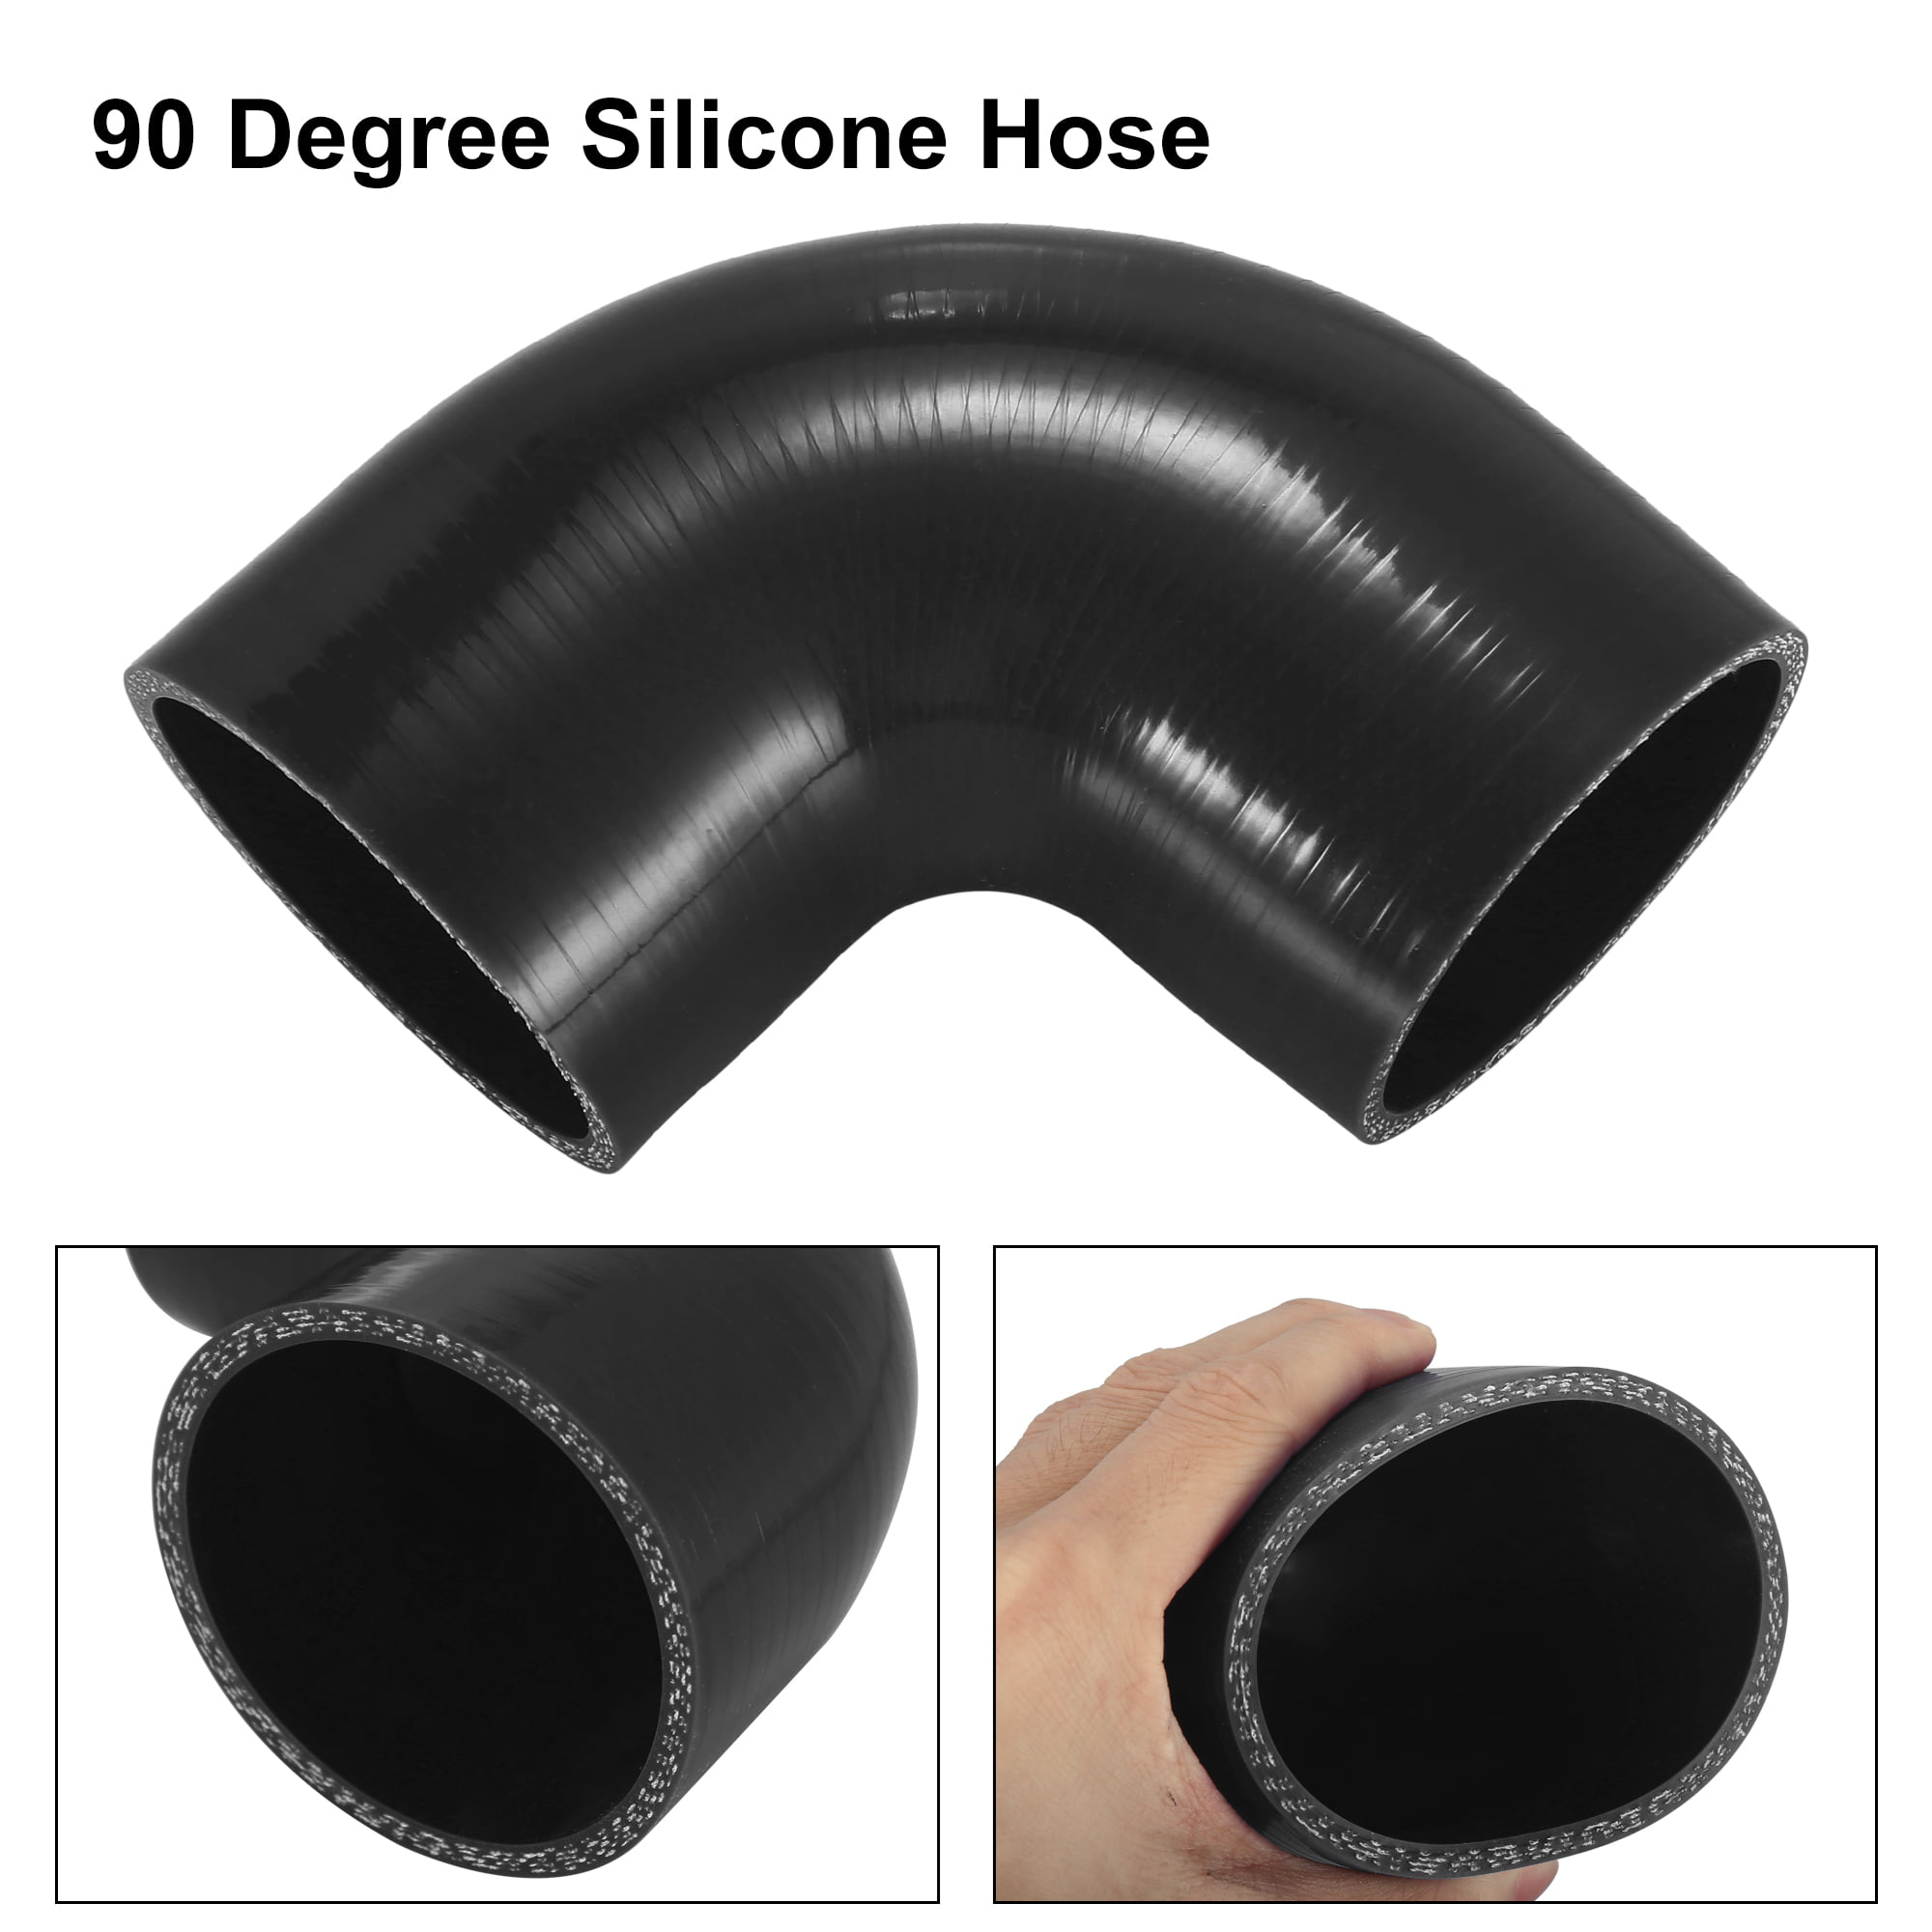 2.75" 69mm 90 DEGREE 90° SILICONE HOSE UPRATED RACE KIT CAR ENGINE PIPE COUPLER 